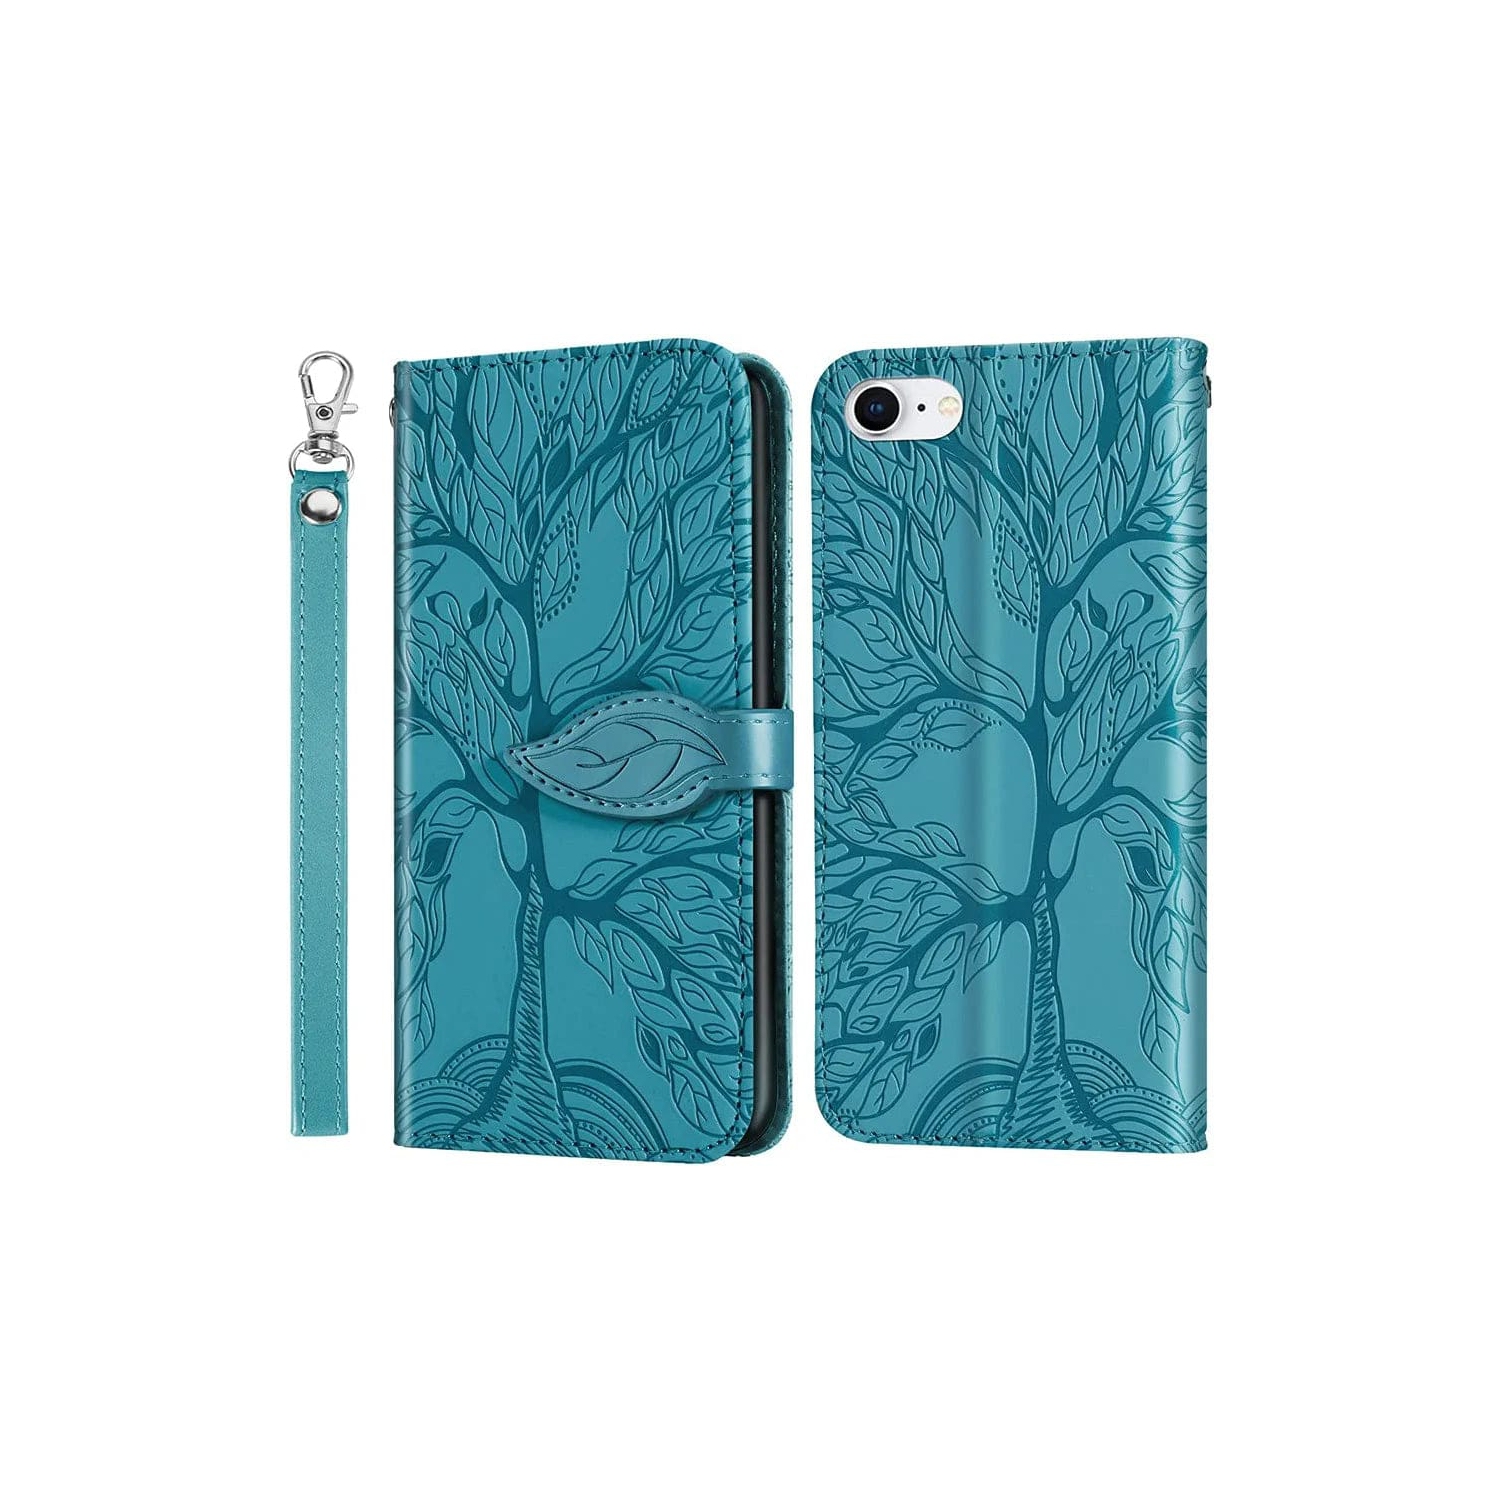 Premium PU Leather Embossed Tree Wallet Case with card slots and wrist strap for iPhone SE 2022 and SE 2020 / iPhone 7 and 8